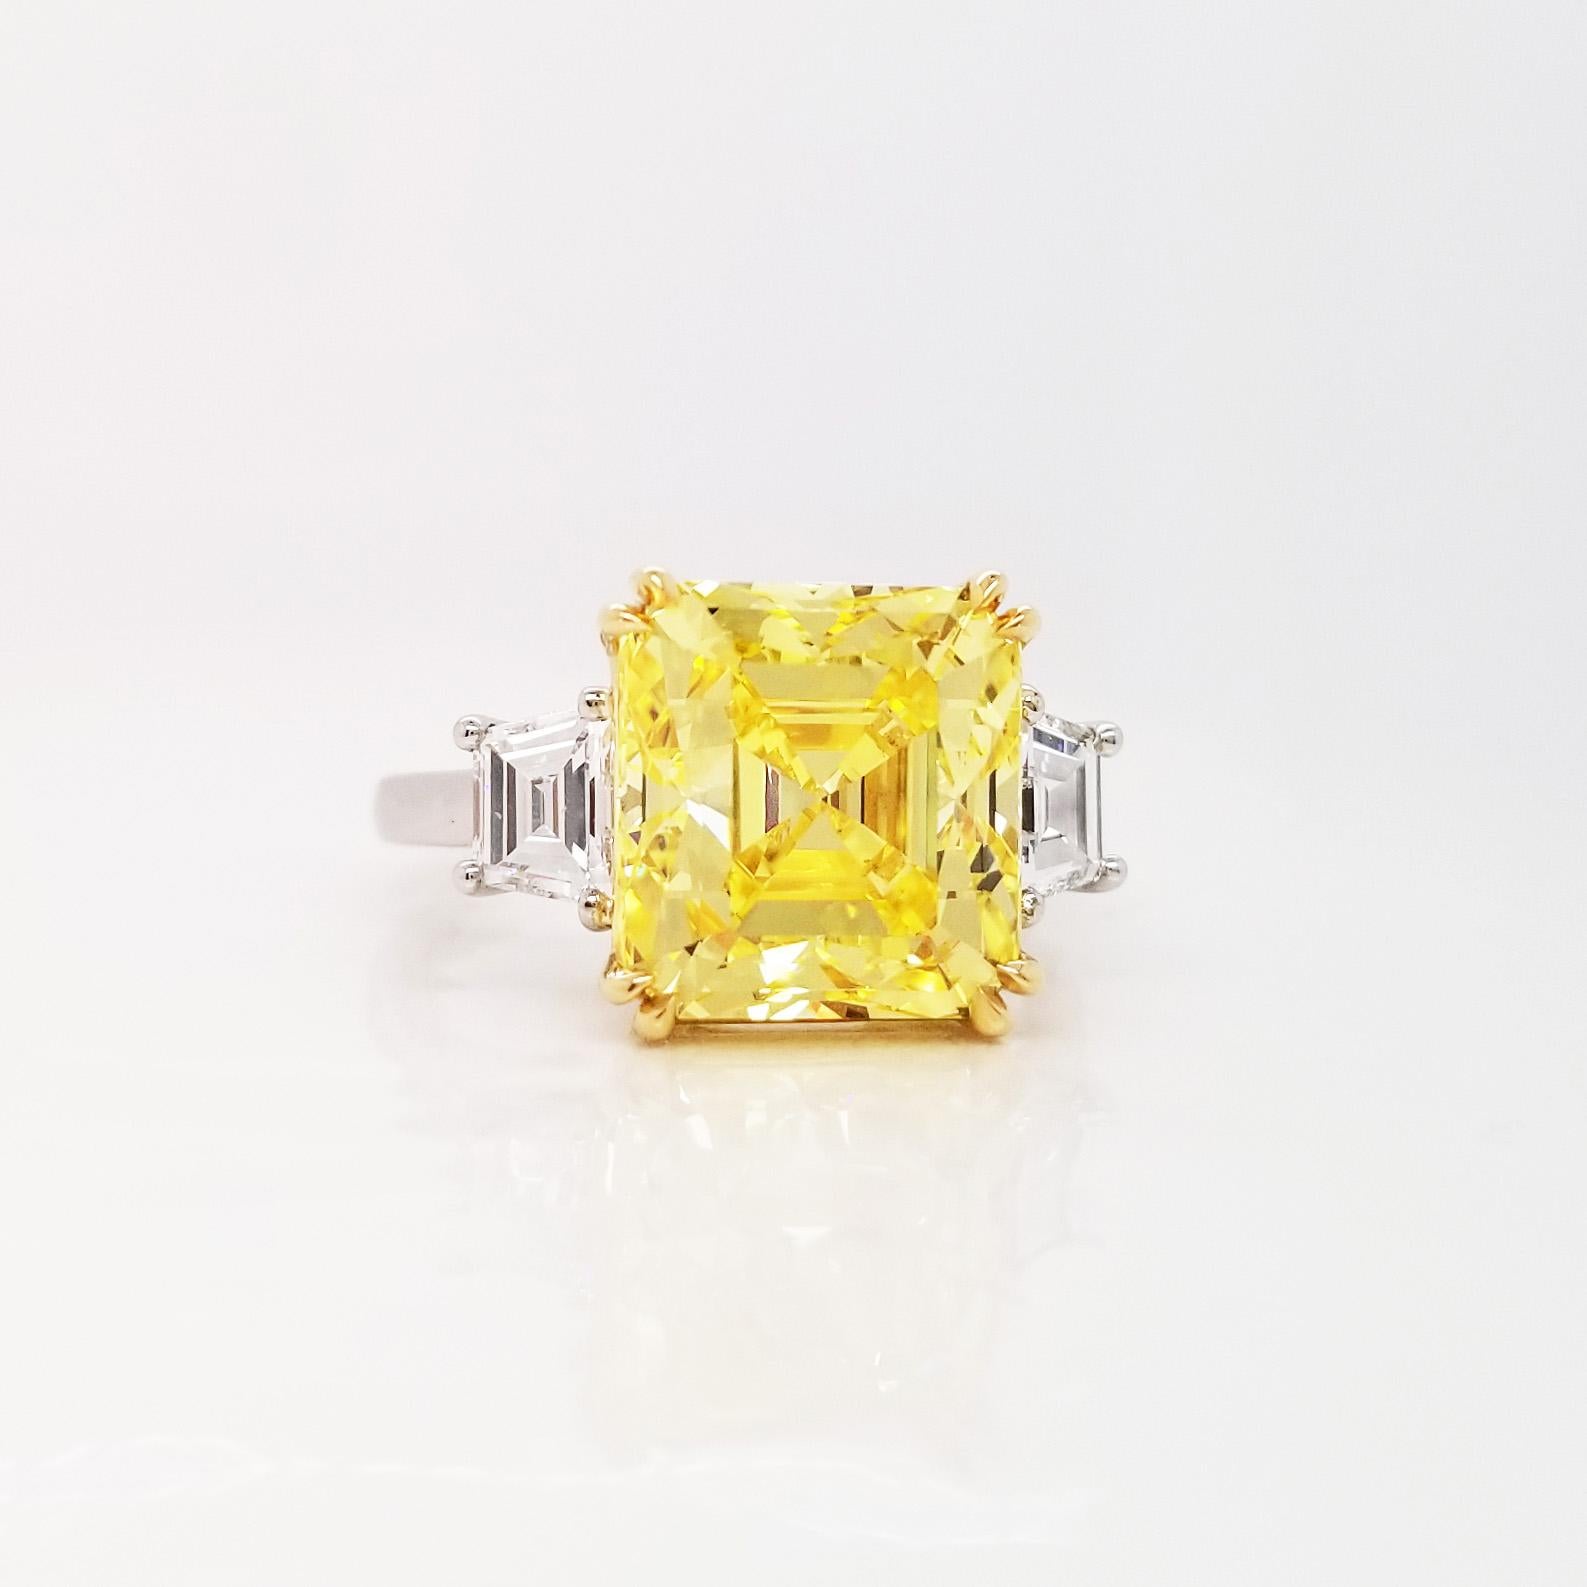 From SCARSELLI, this beautiful statement ring features a 6-carat Fancy Vivid Yellow Radiant Cut Diamond of VS2 clarity flanked by a couple of E color VS clarity trapezoid cut white diamonds totaling 0.76 carats (see GIA certificate picture for more